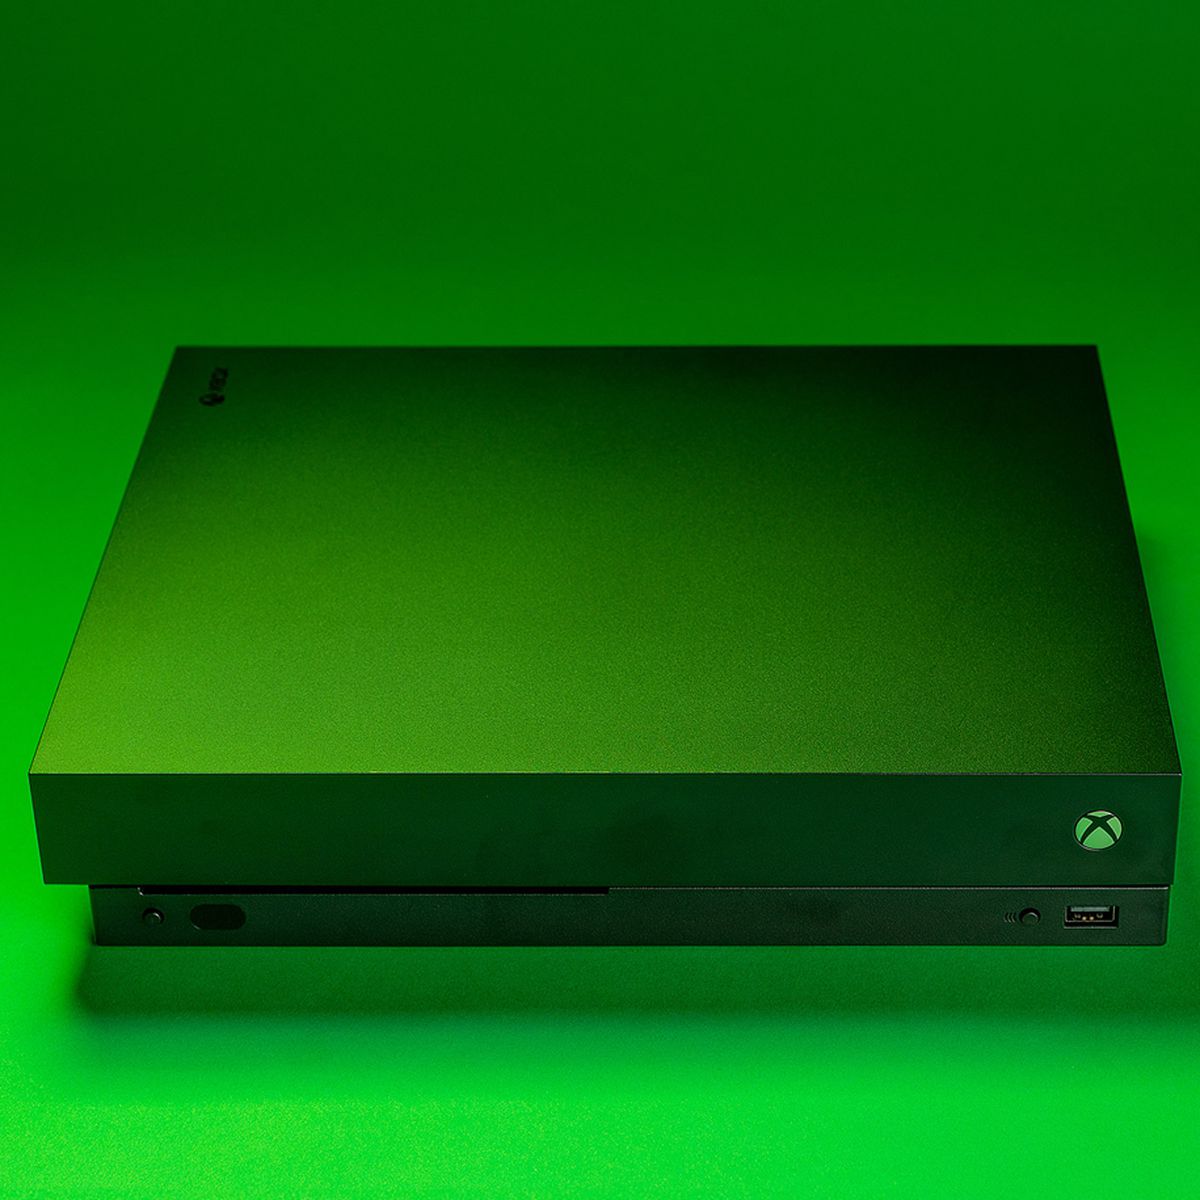 A product shot of the Xbox One X